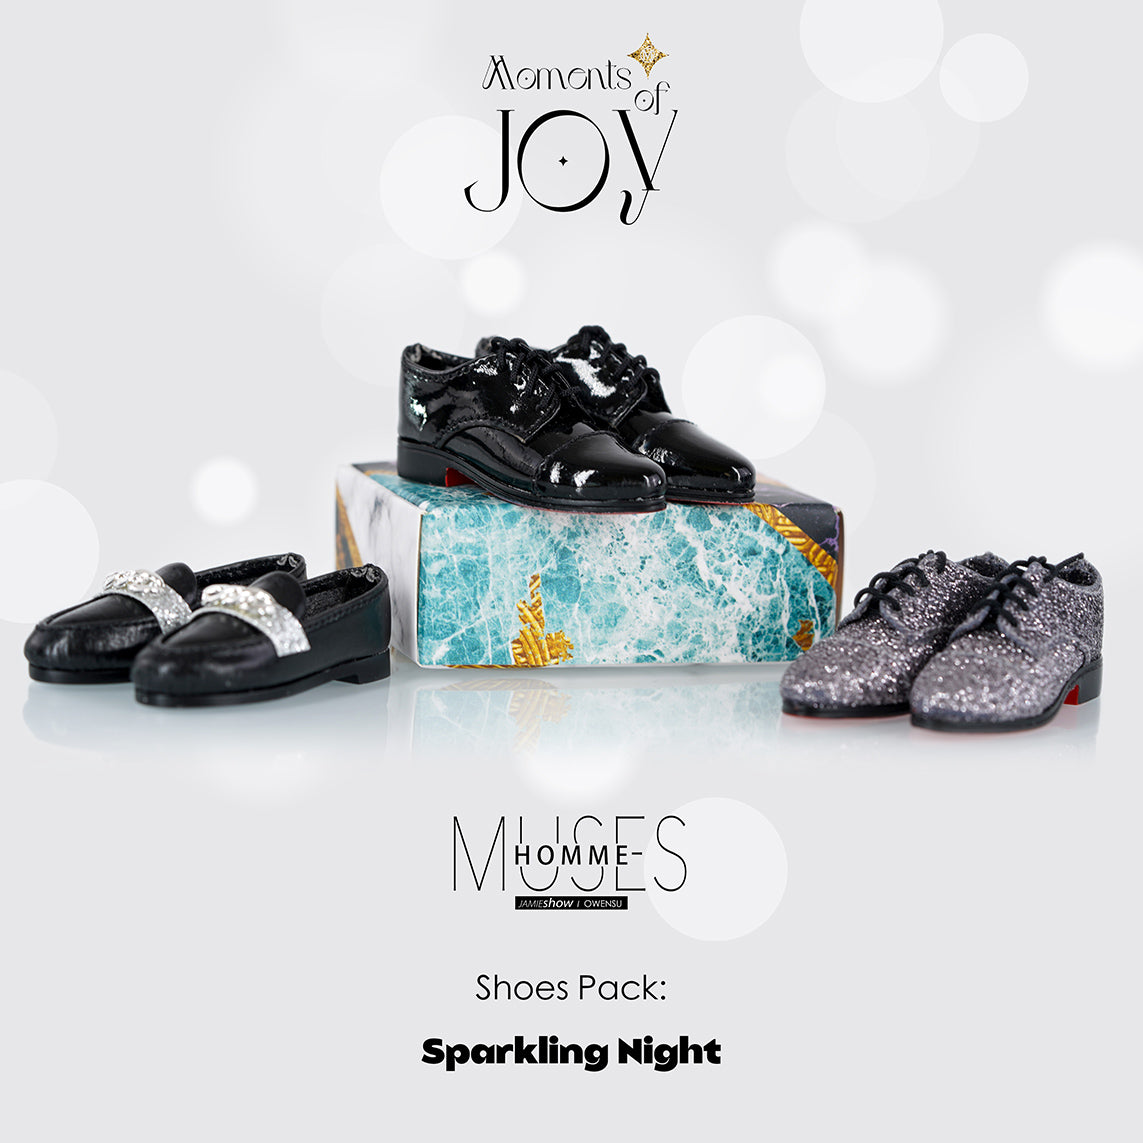 Muses Moments of Joy Men's Shoe Pack SPARKLING NIGHT